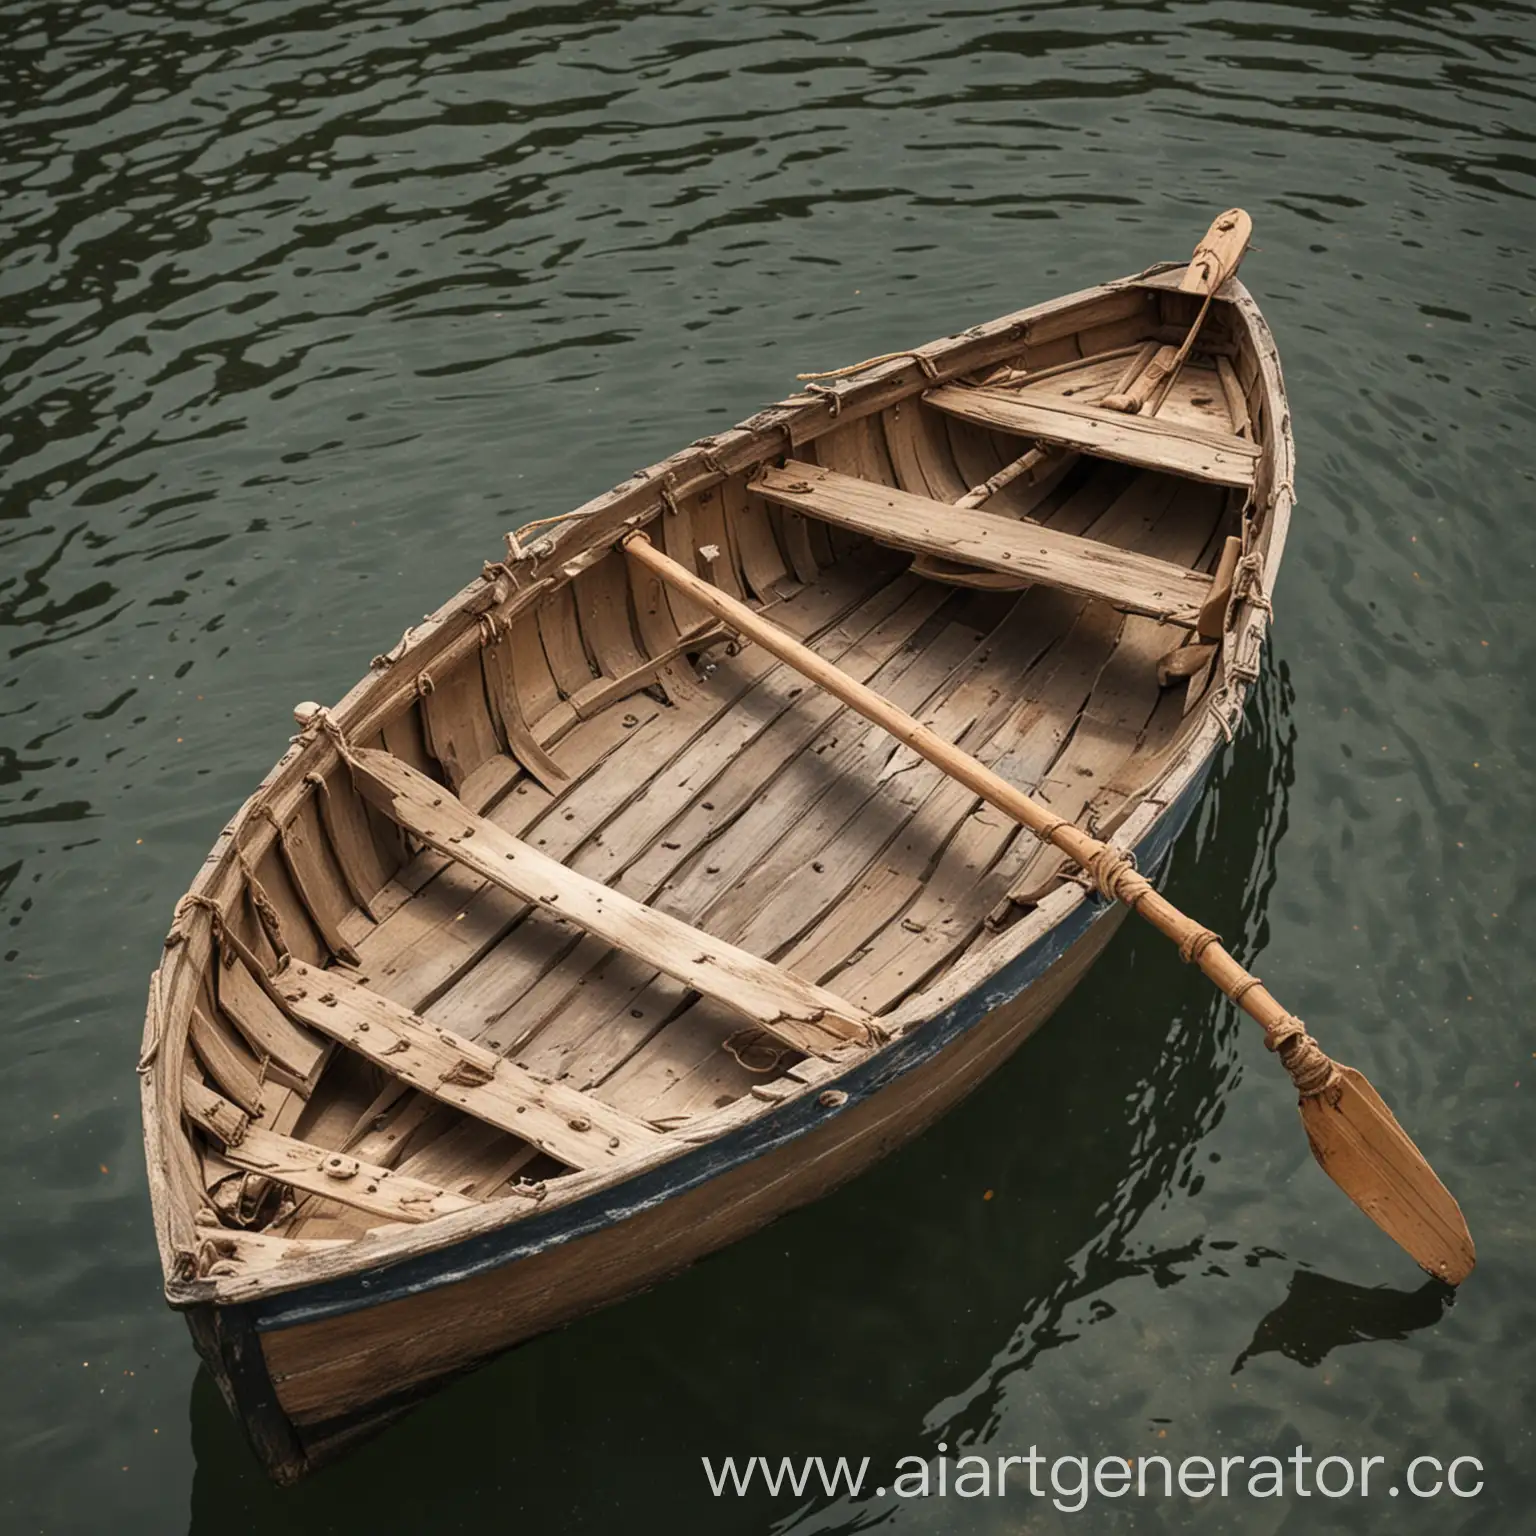 Tranquil-Scene-Small-Wooden-Boat-with-Oars-Floating-on-Calm-Water